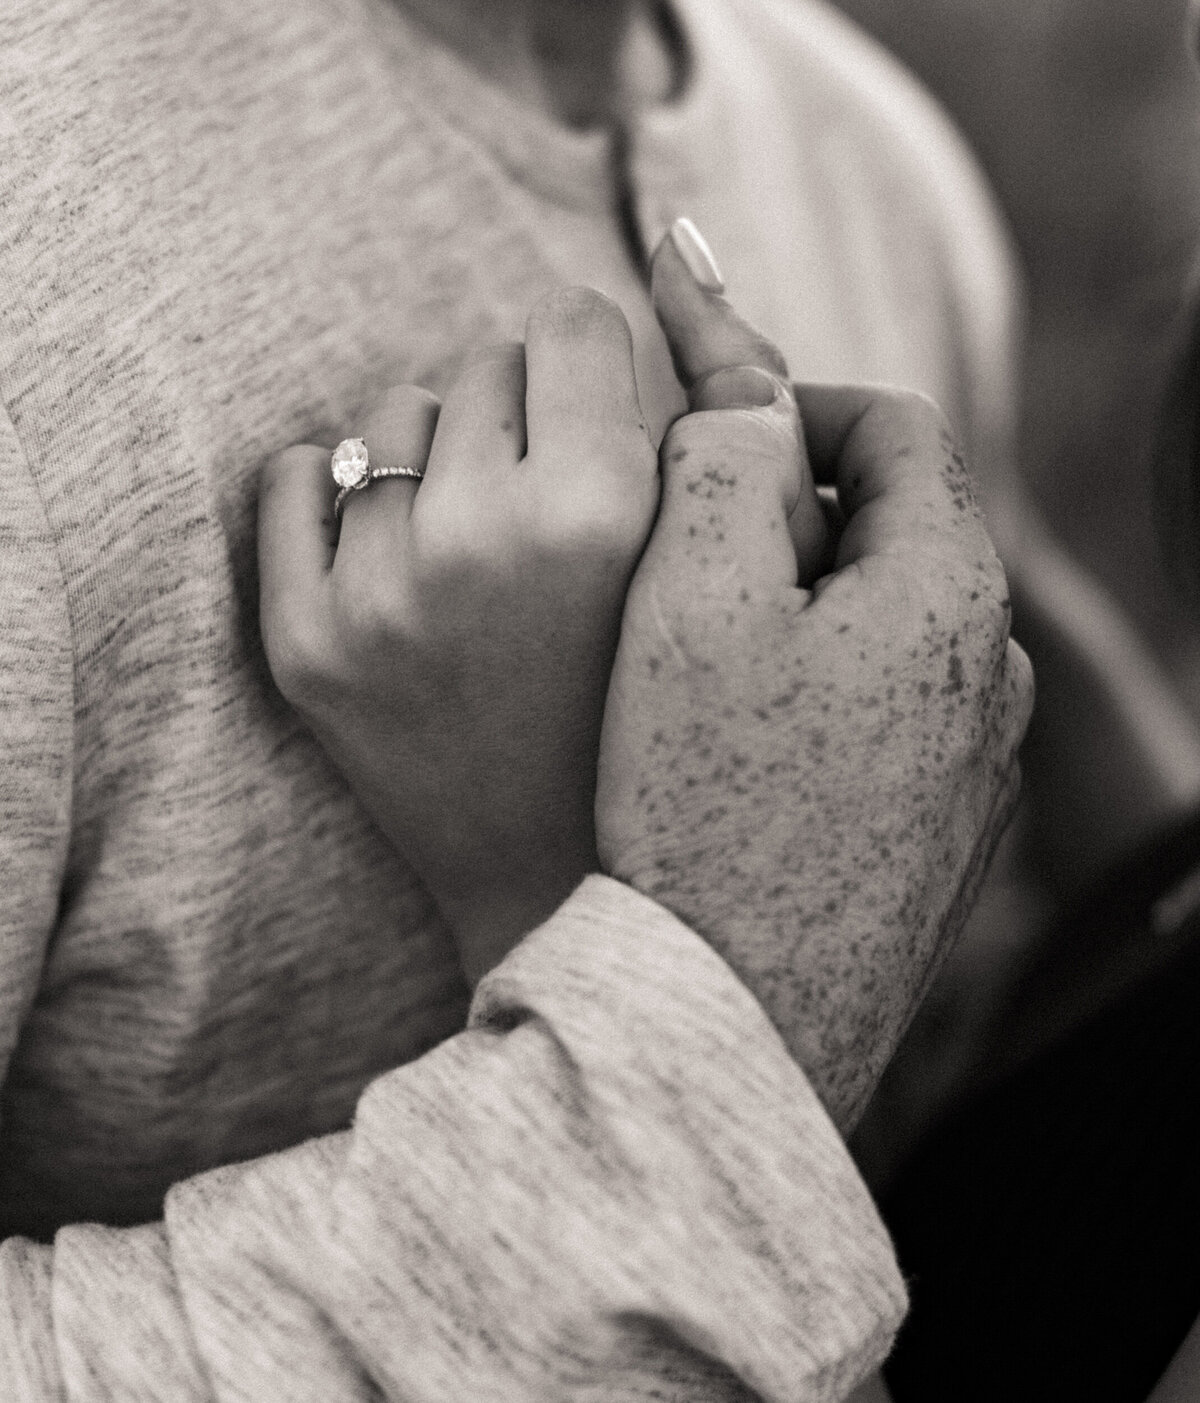 A guy is holding his fiancé's hand close to his chest while she wears a sparkly engagement ring.